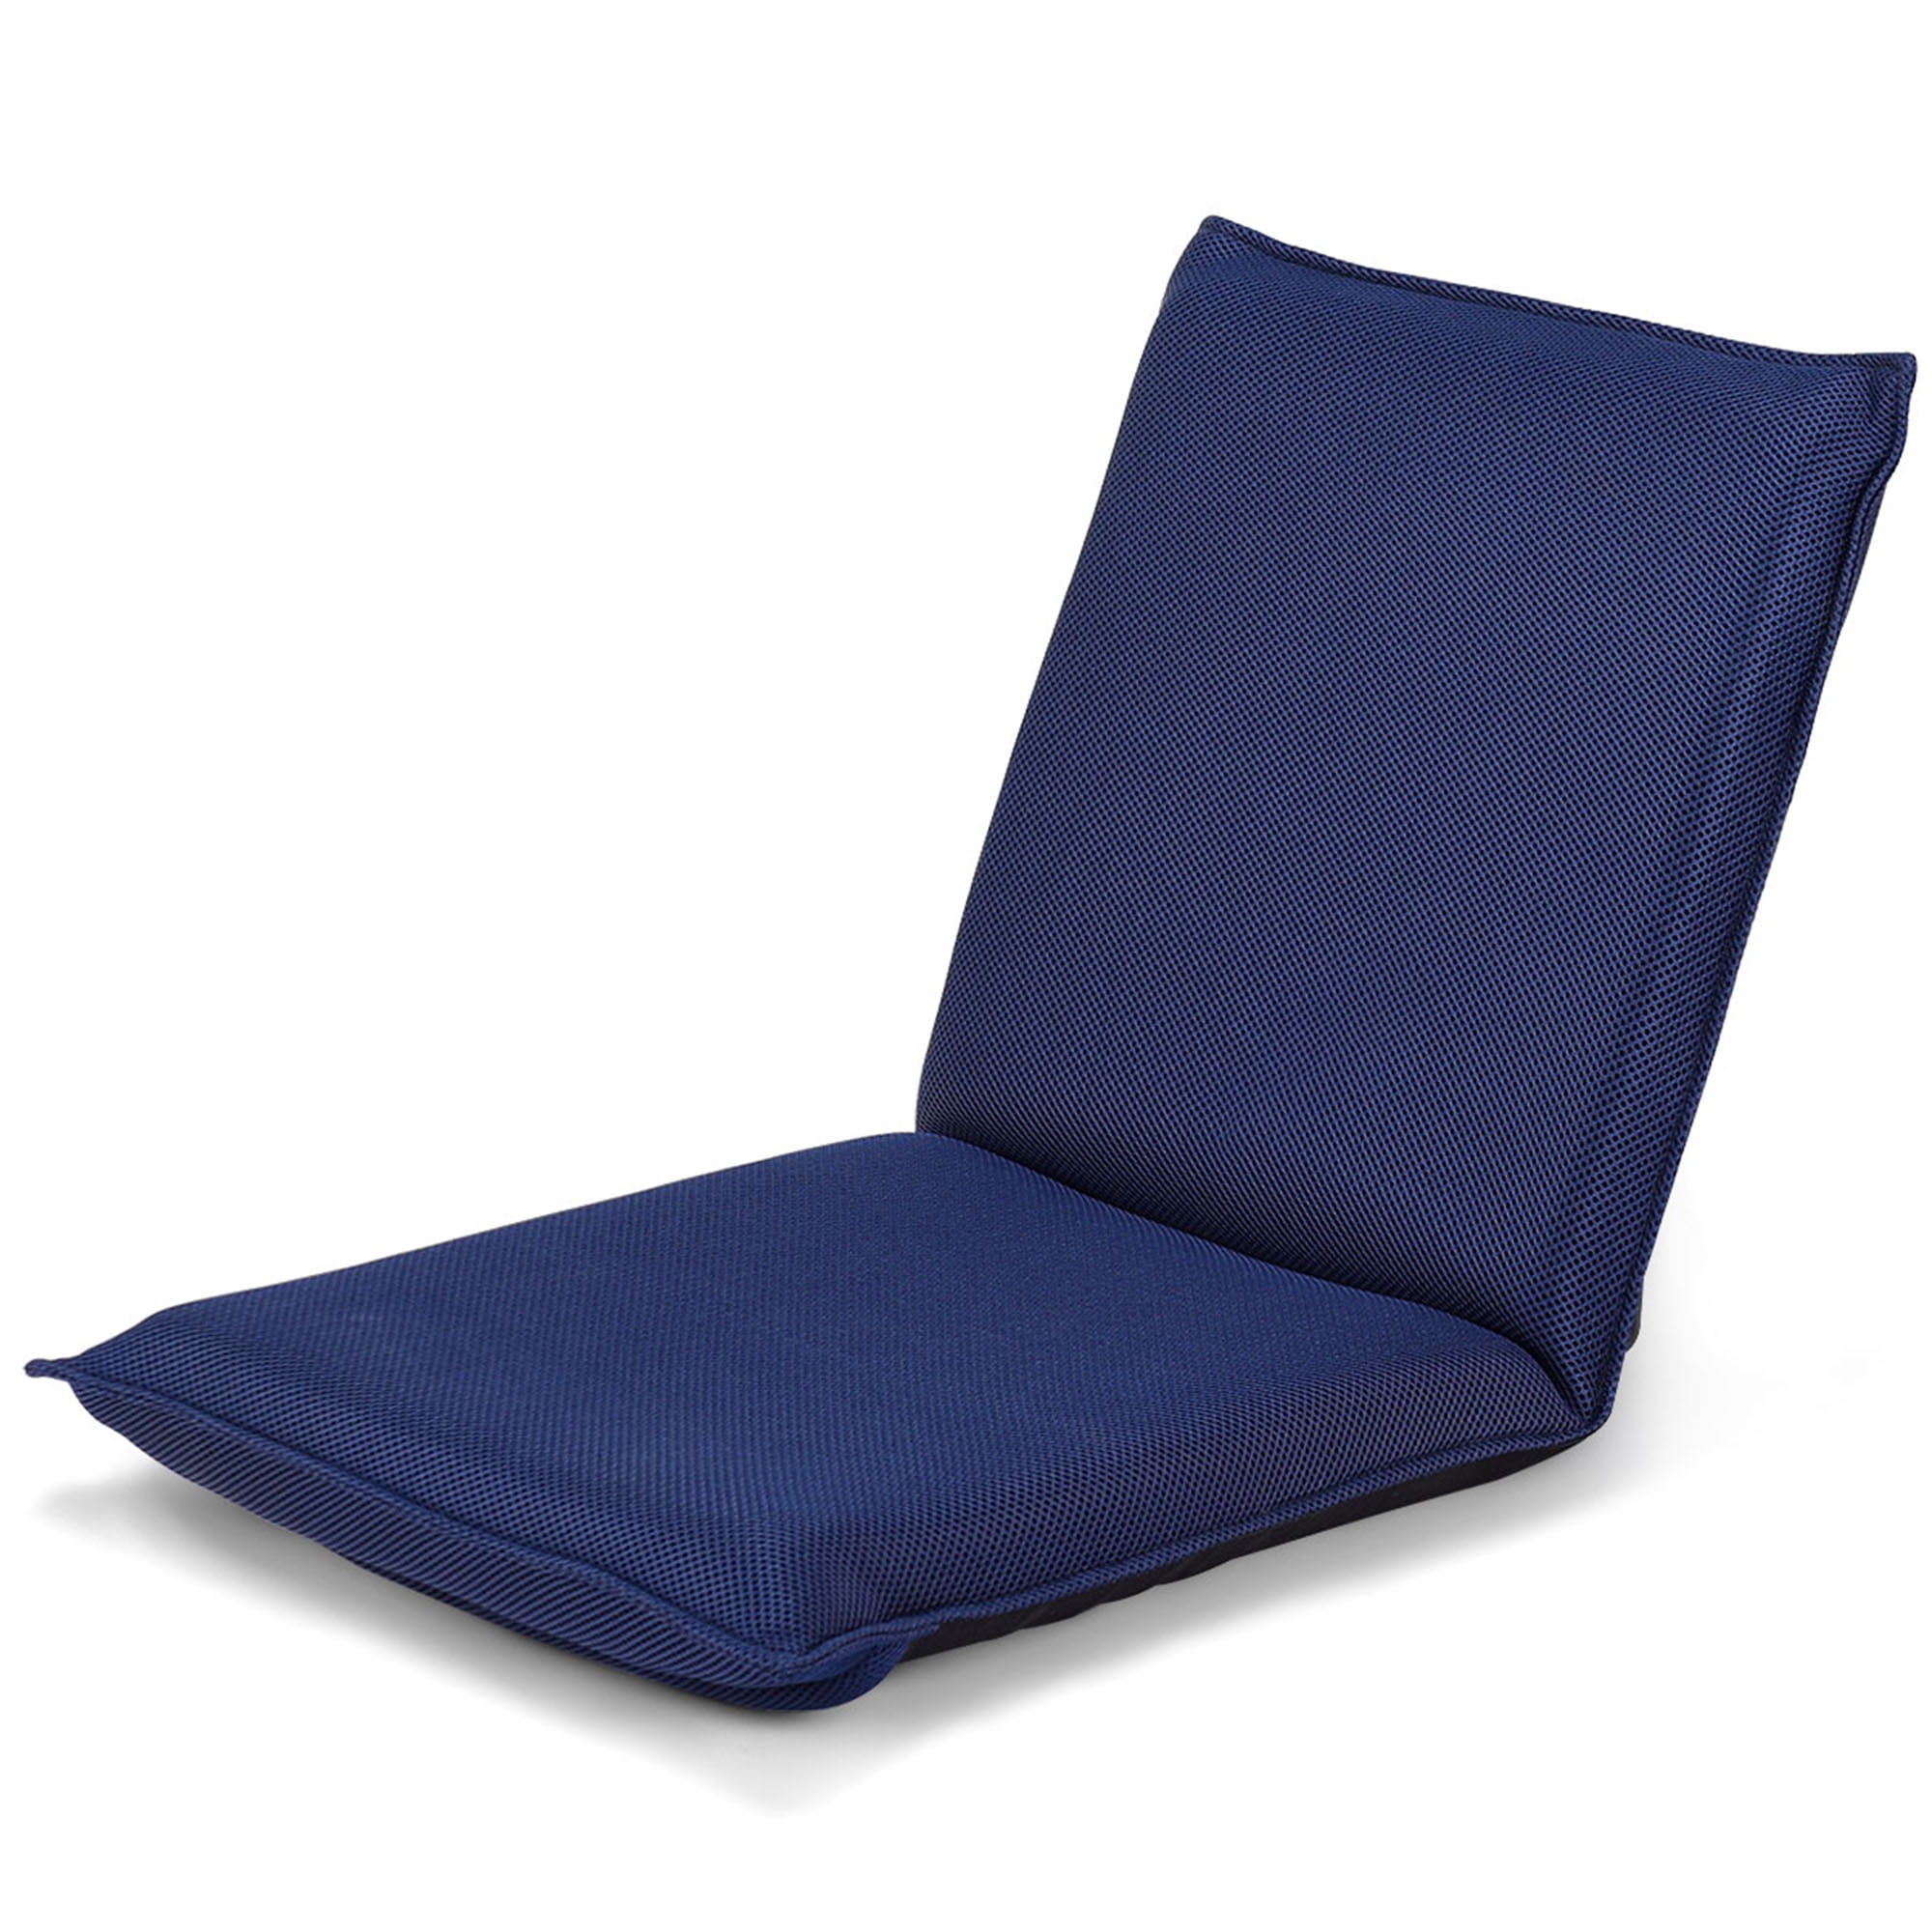  bonVIVO Floor Chair with Back Support - Multi-Angle